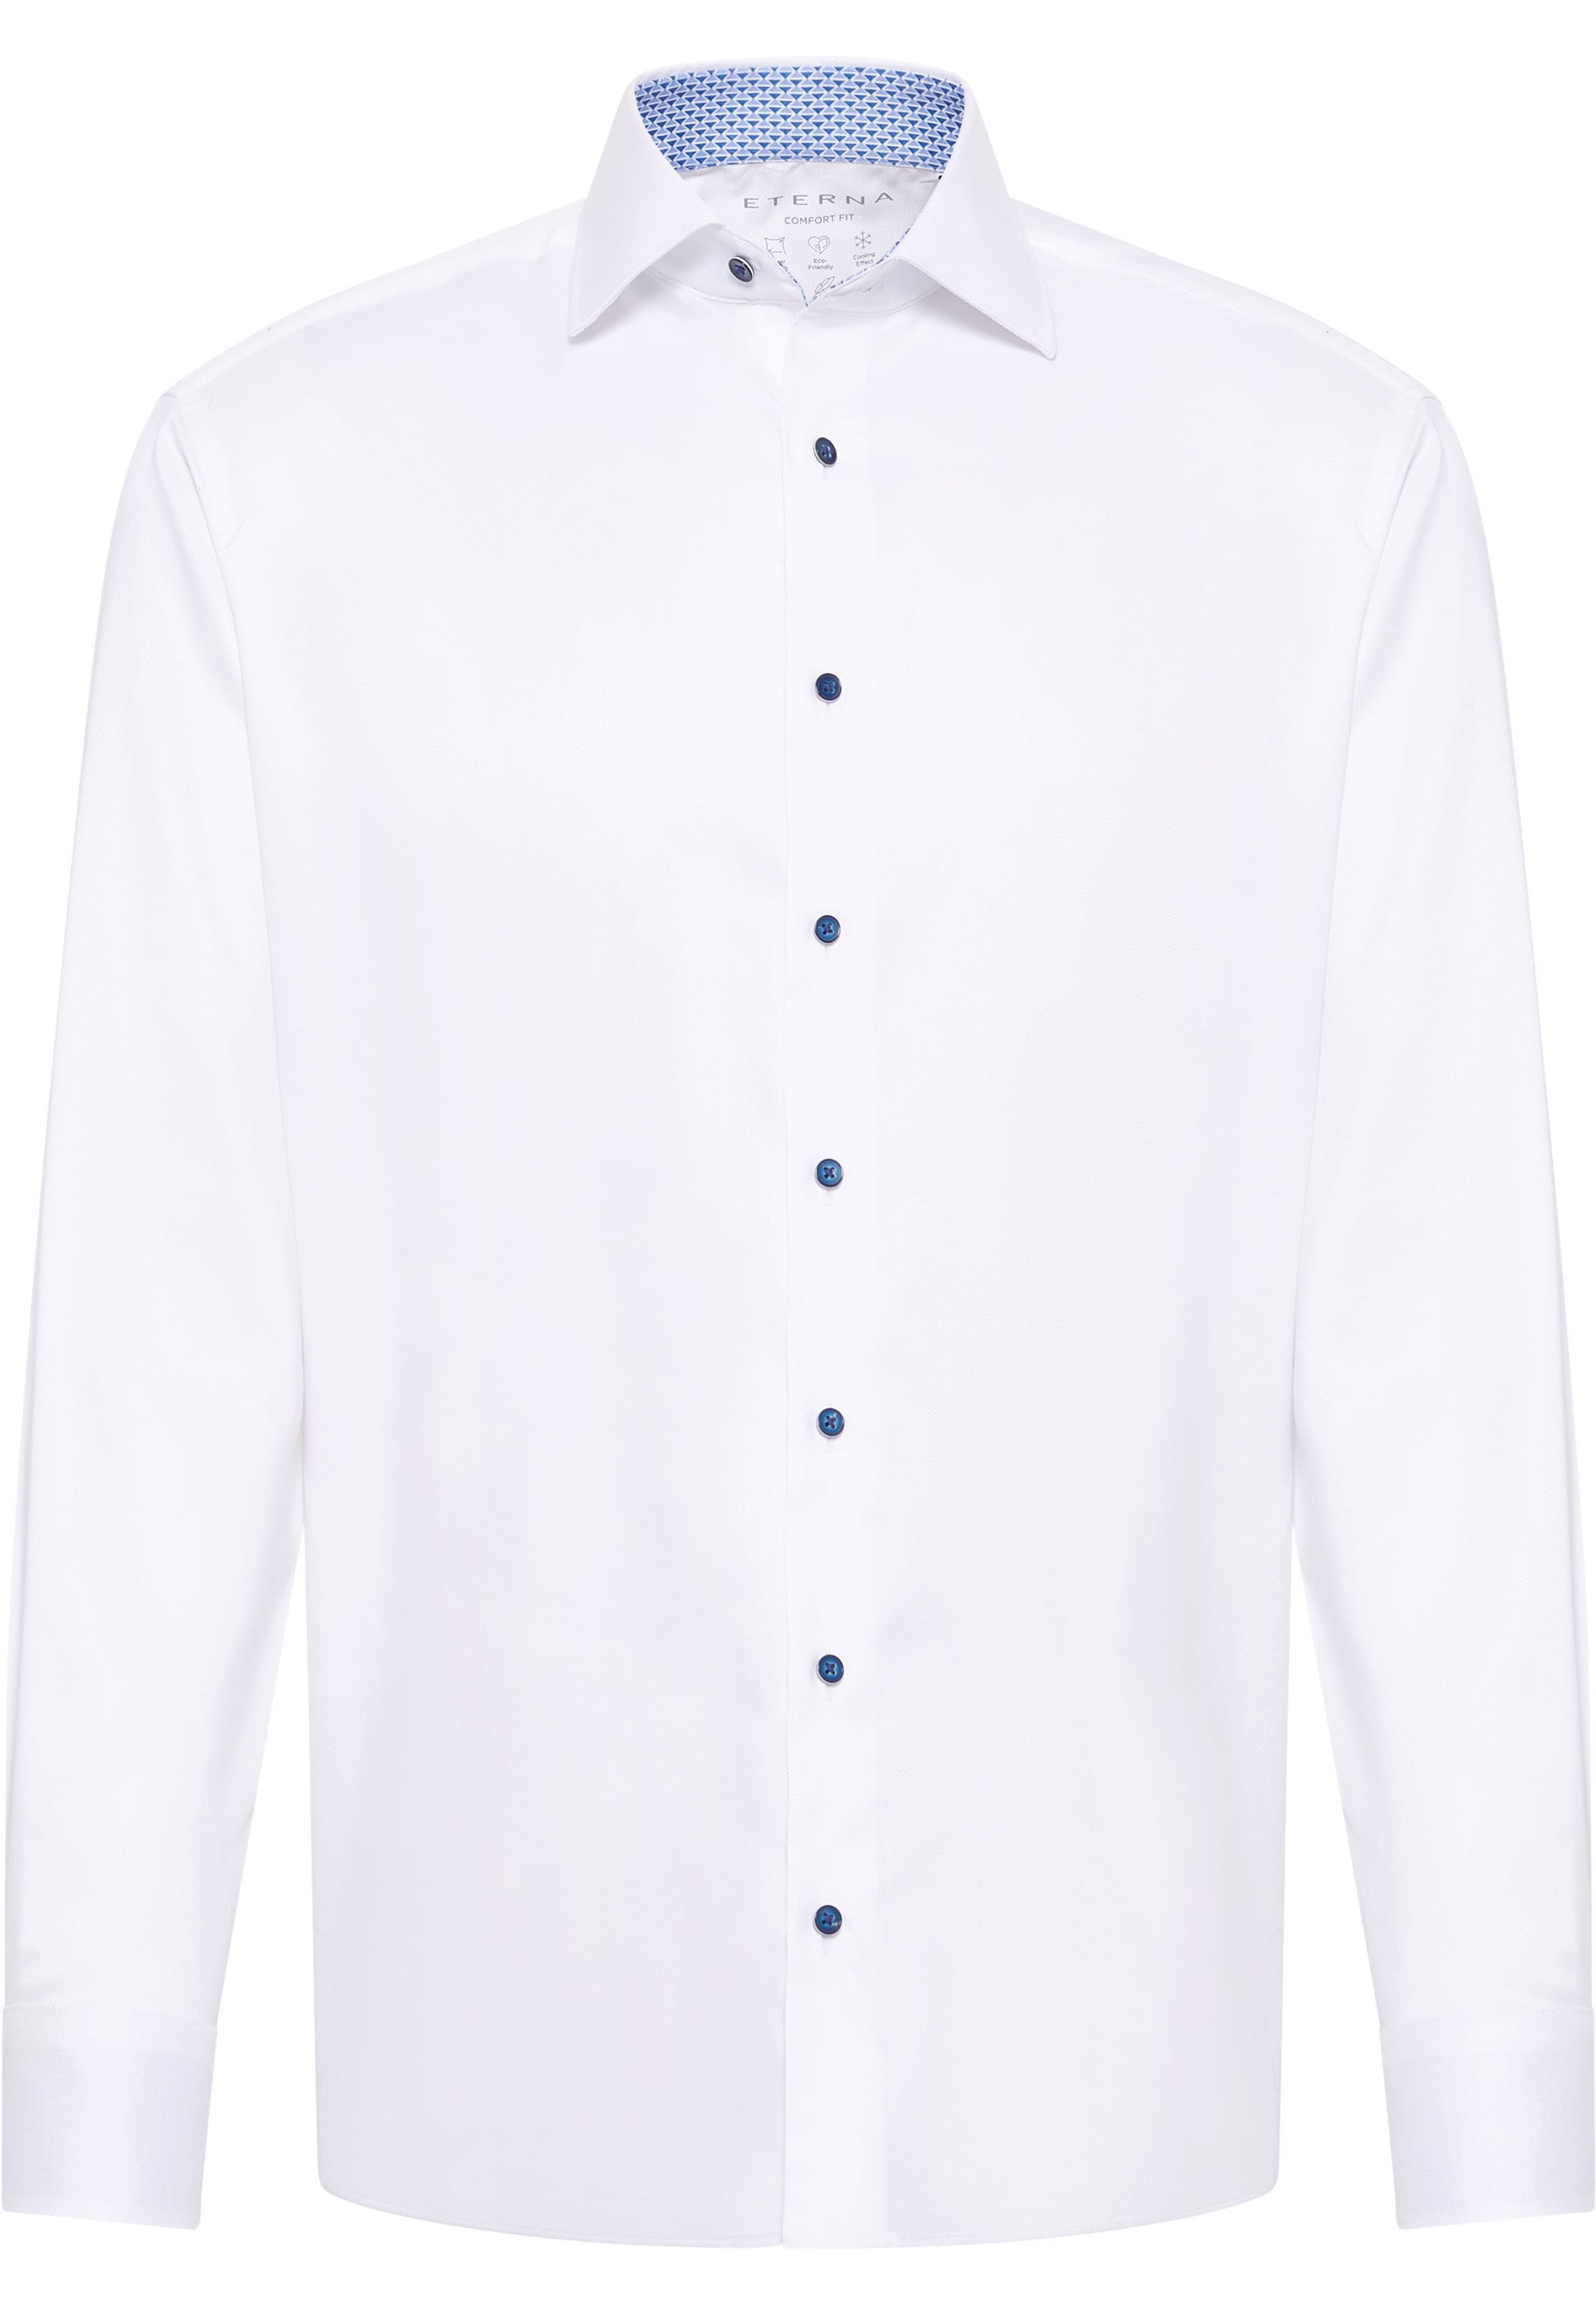 COMFORT FIT Performance Shirt in white structured